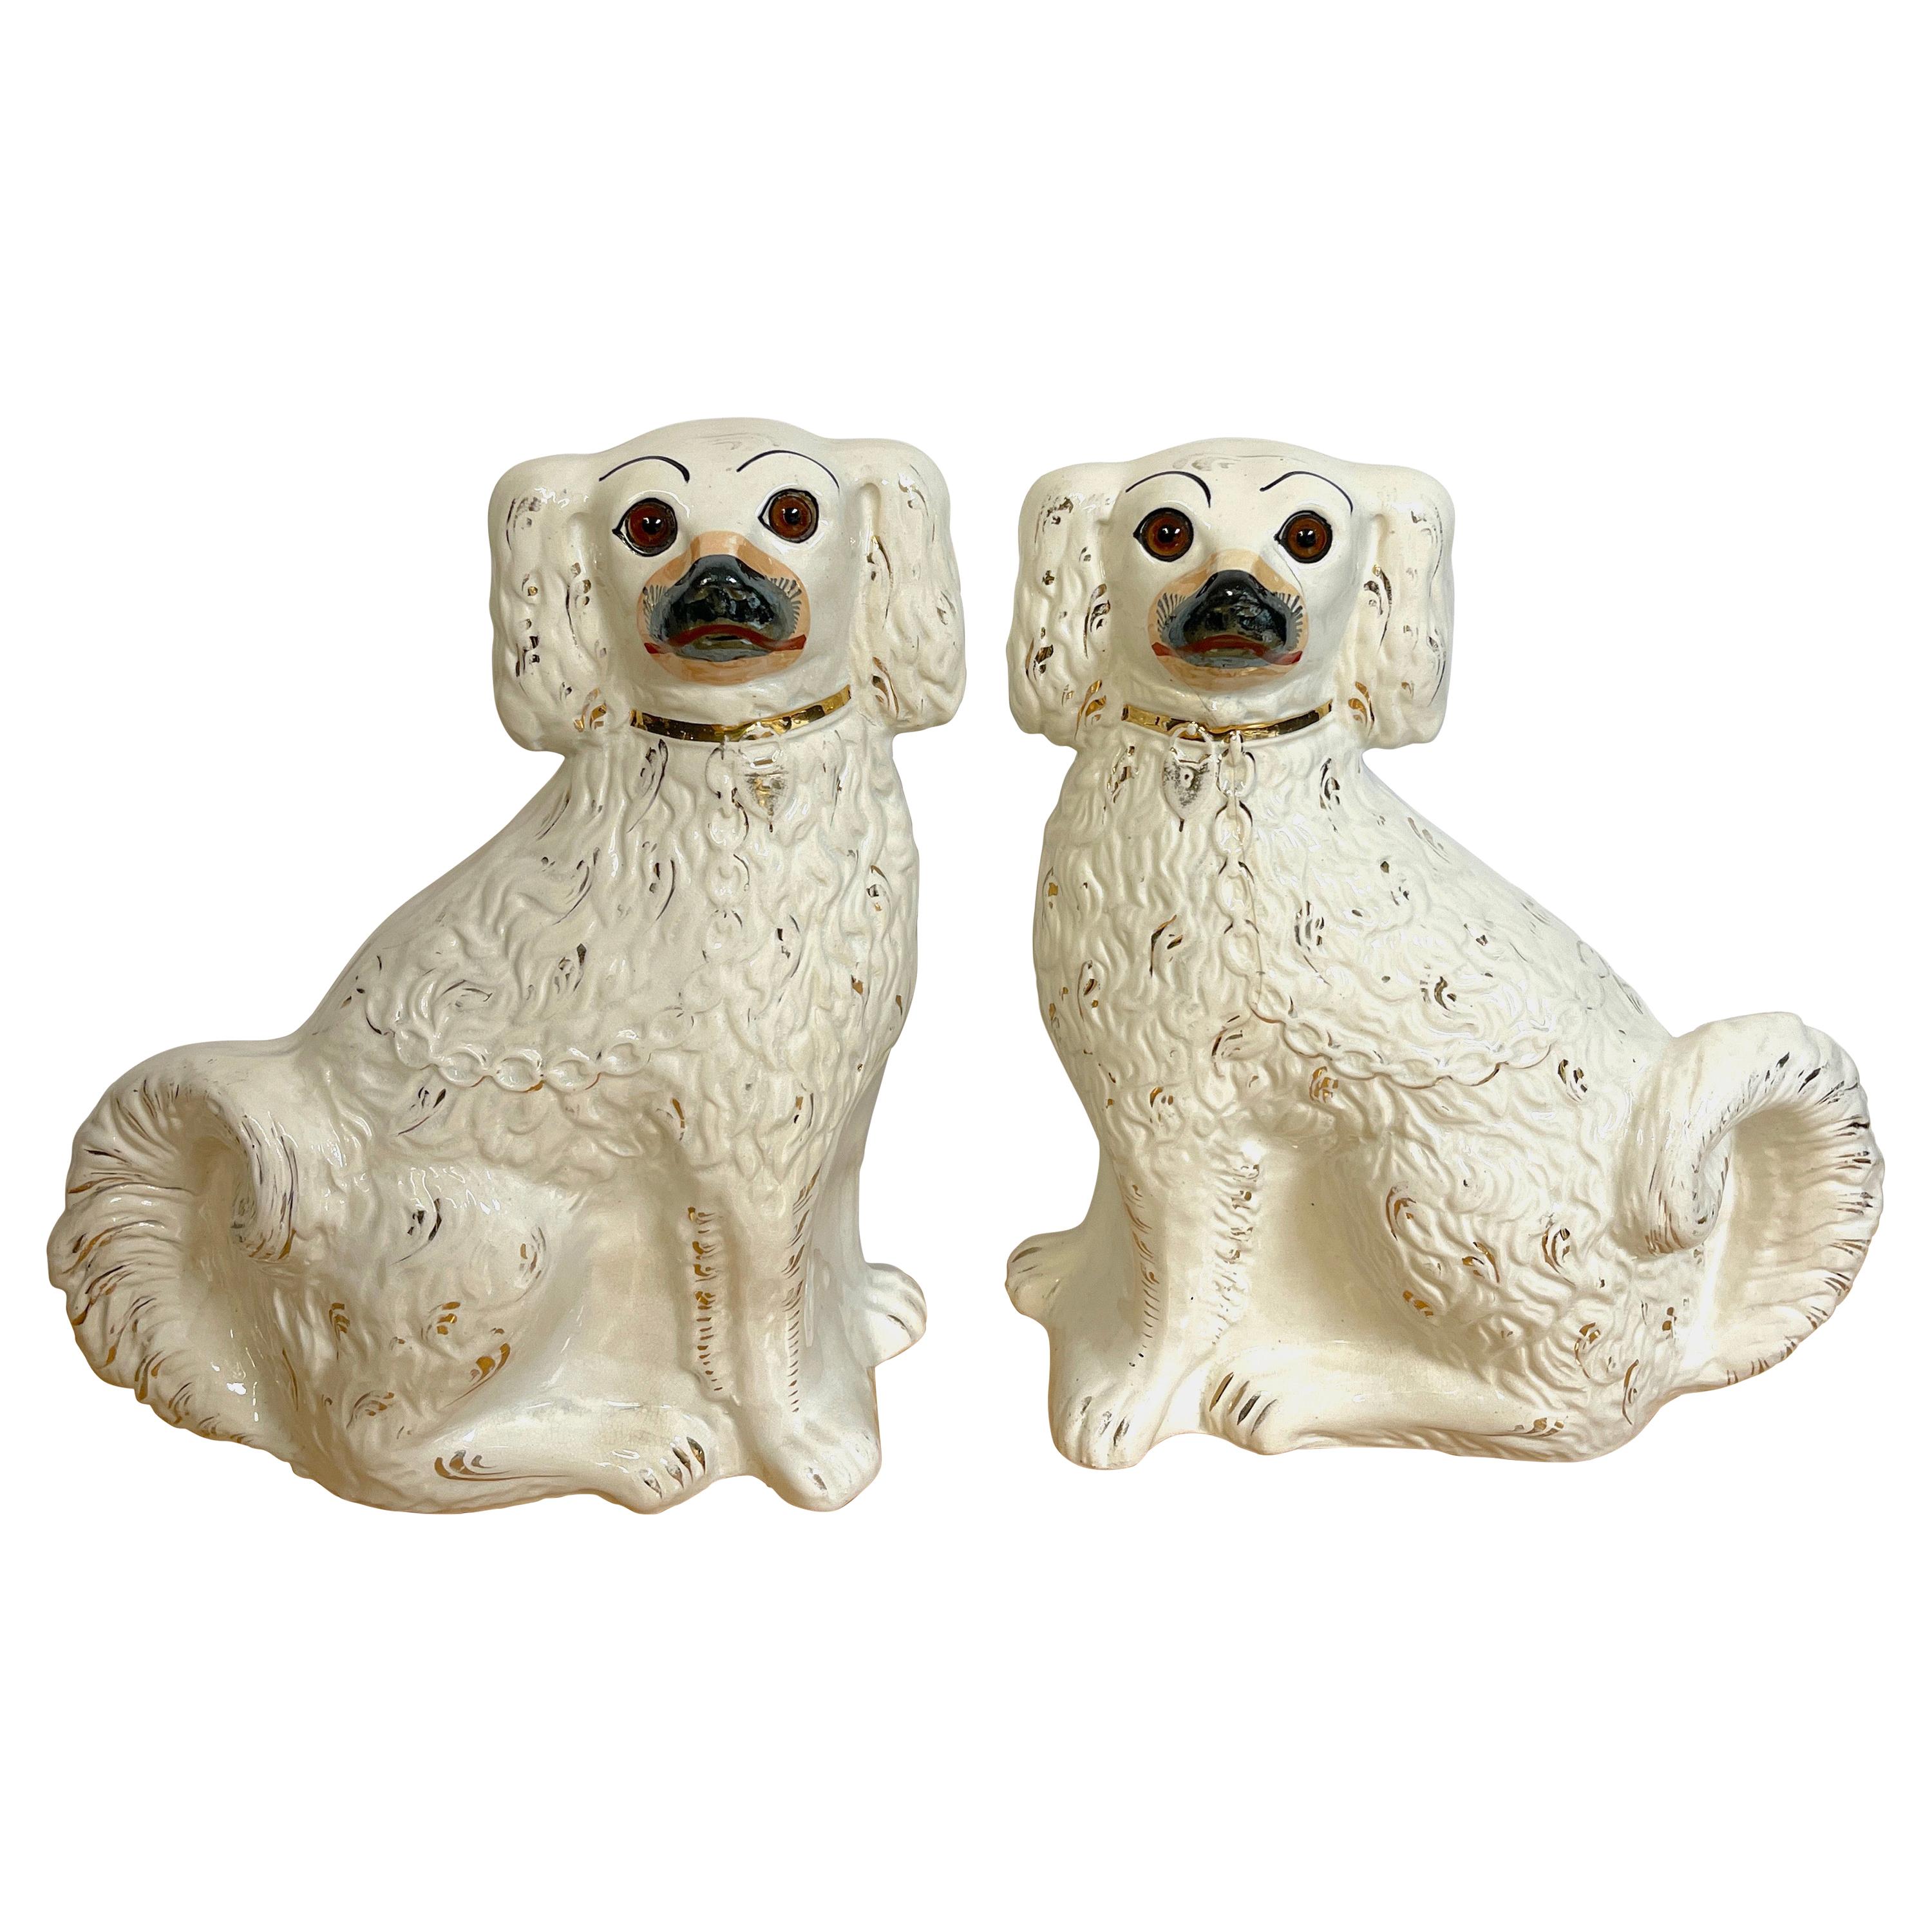 Pair of 19th Century White & Gilt Decorated Staffordshire Dogs